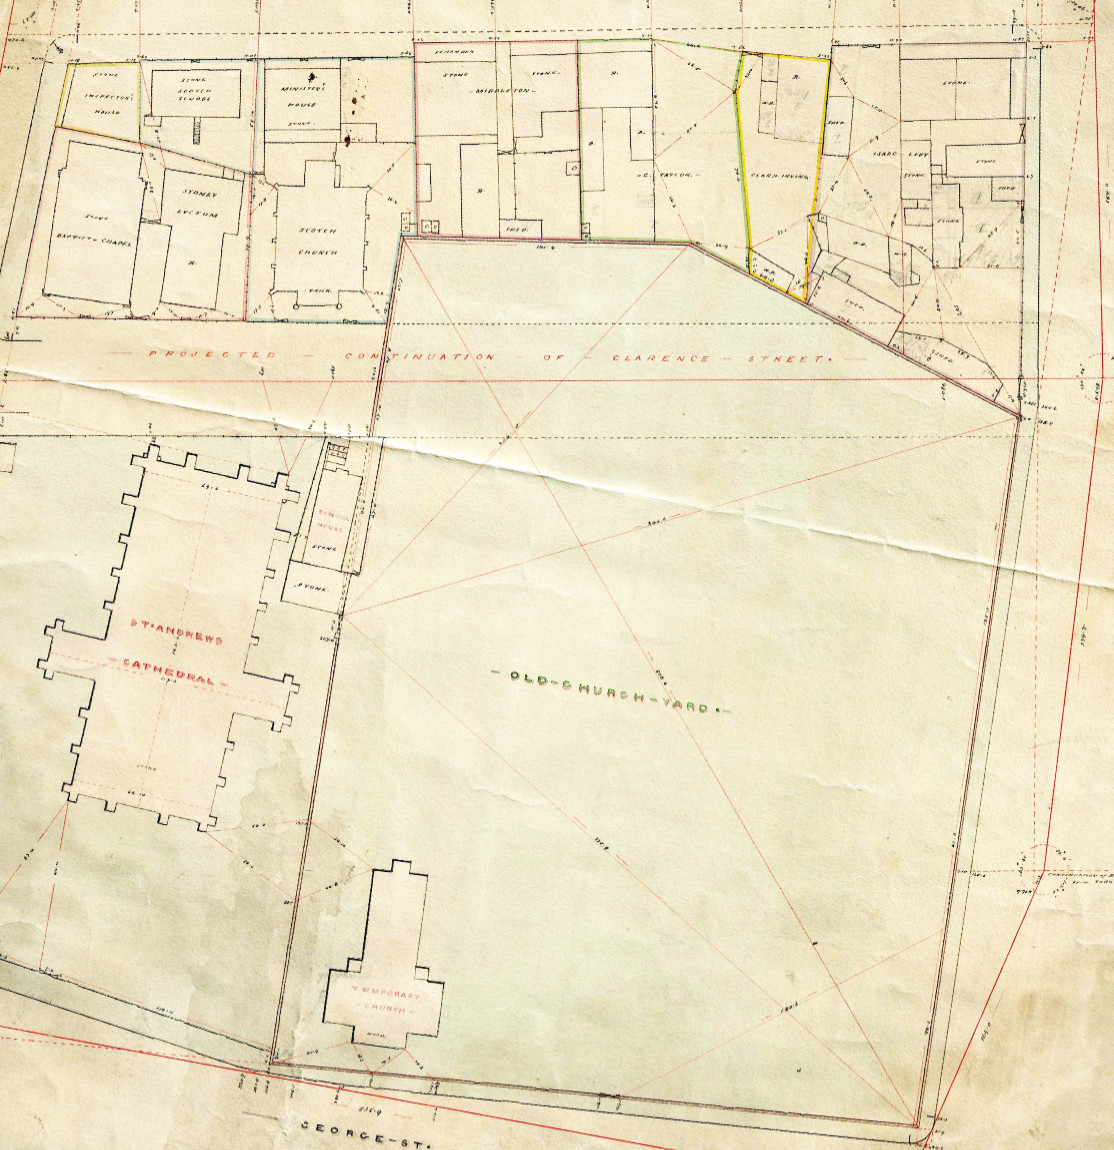 Site for a Town Hall, Sydney, 1843-1868